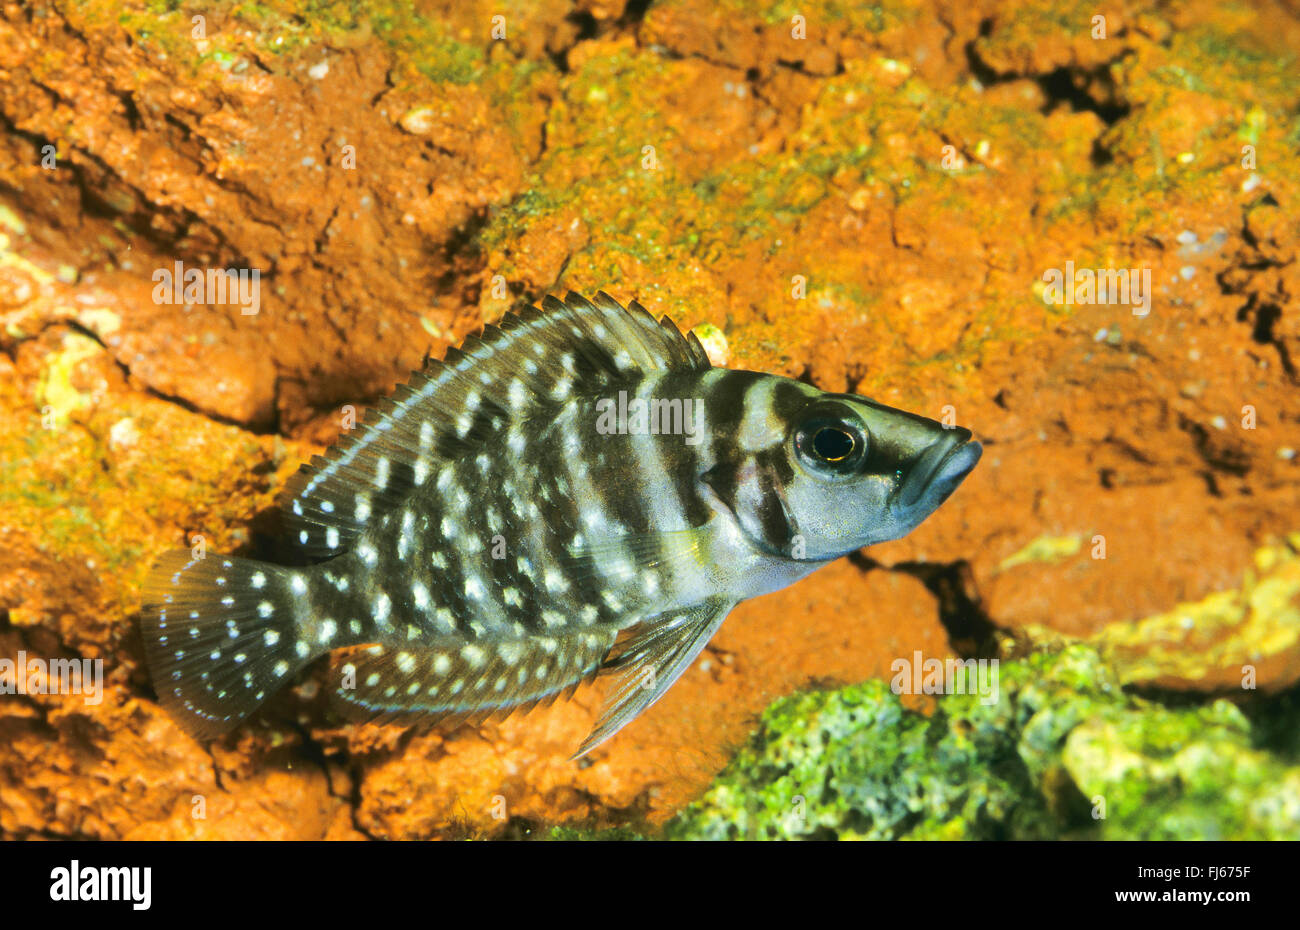 Congo black pearl, Pearly Lamprologus (Altolamprologus calvus, Neolamprologus calvus, Lamprologus calvus), swimming Stock Photo